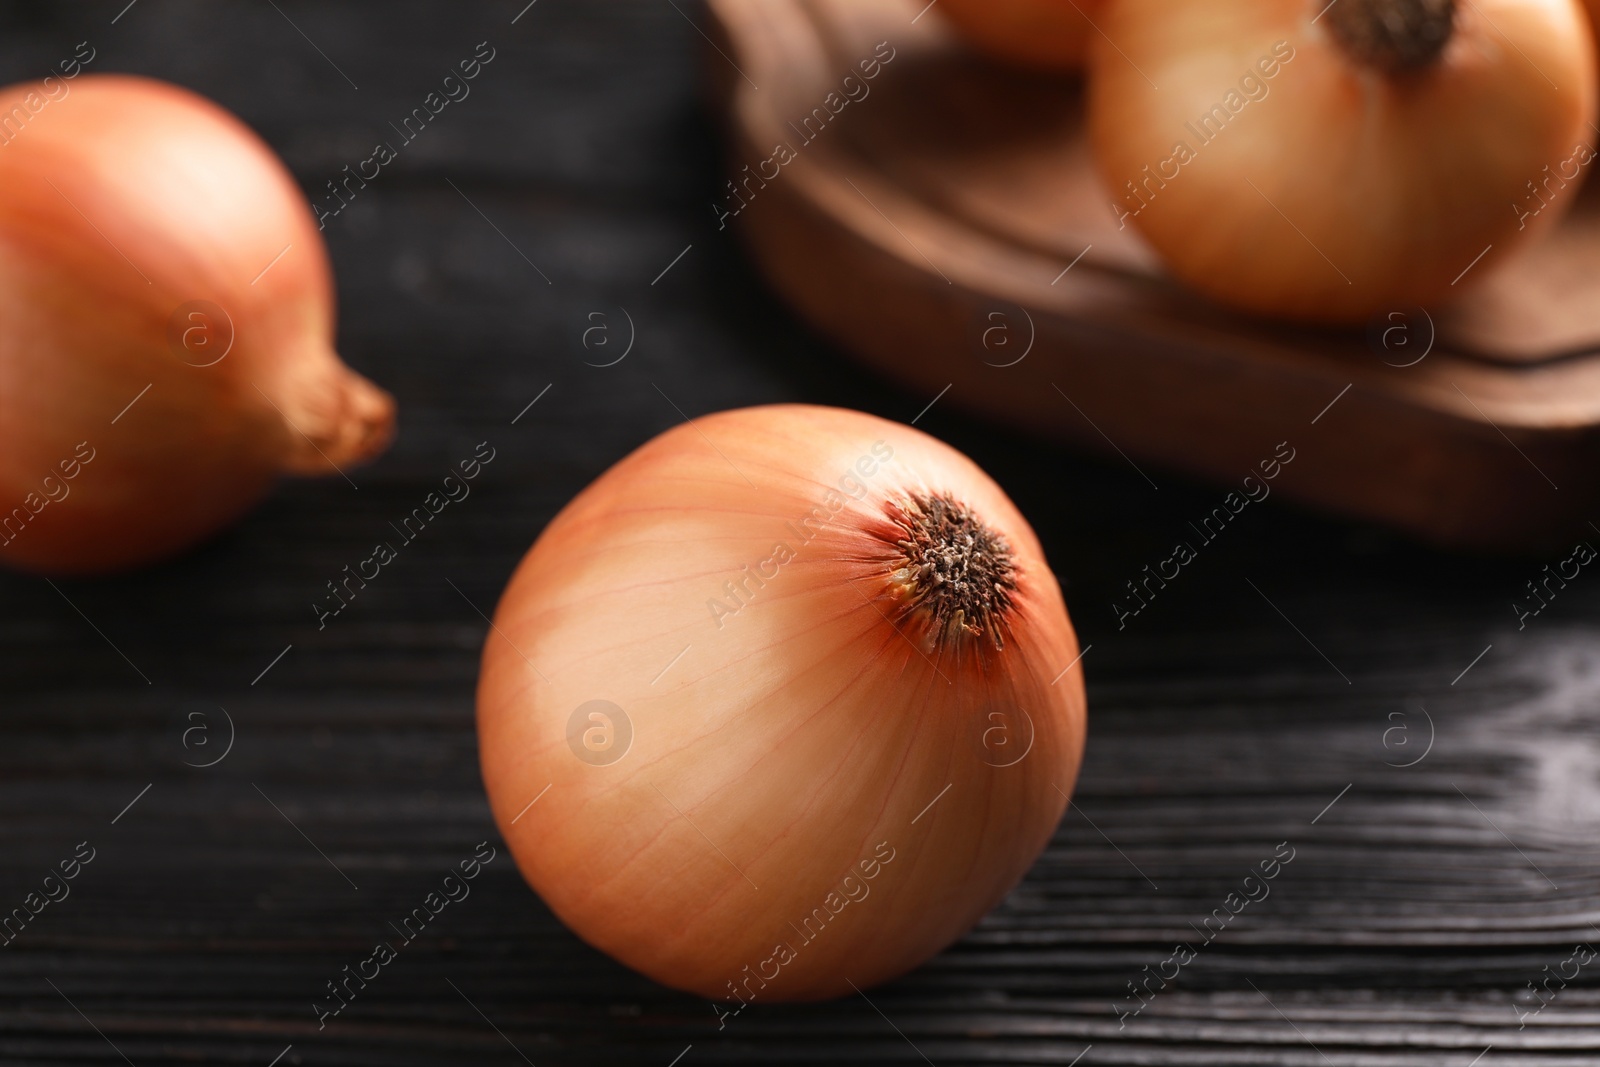 Photo of Ripe onions on black wooden table, closeup